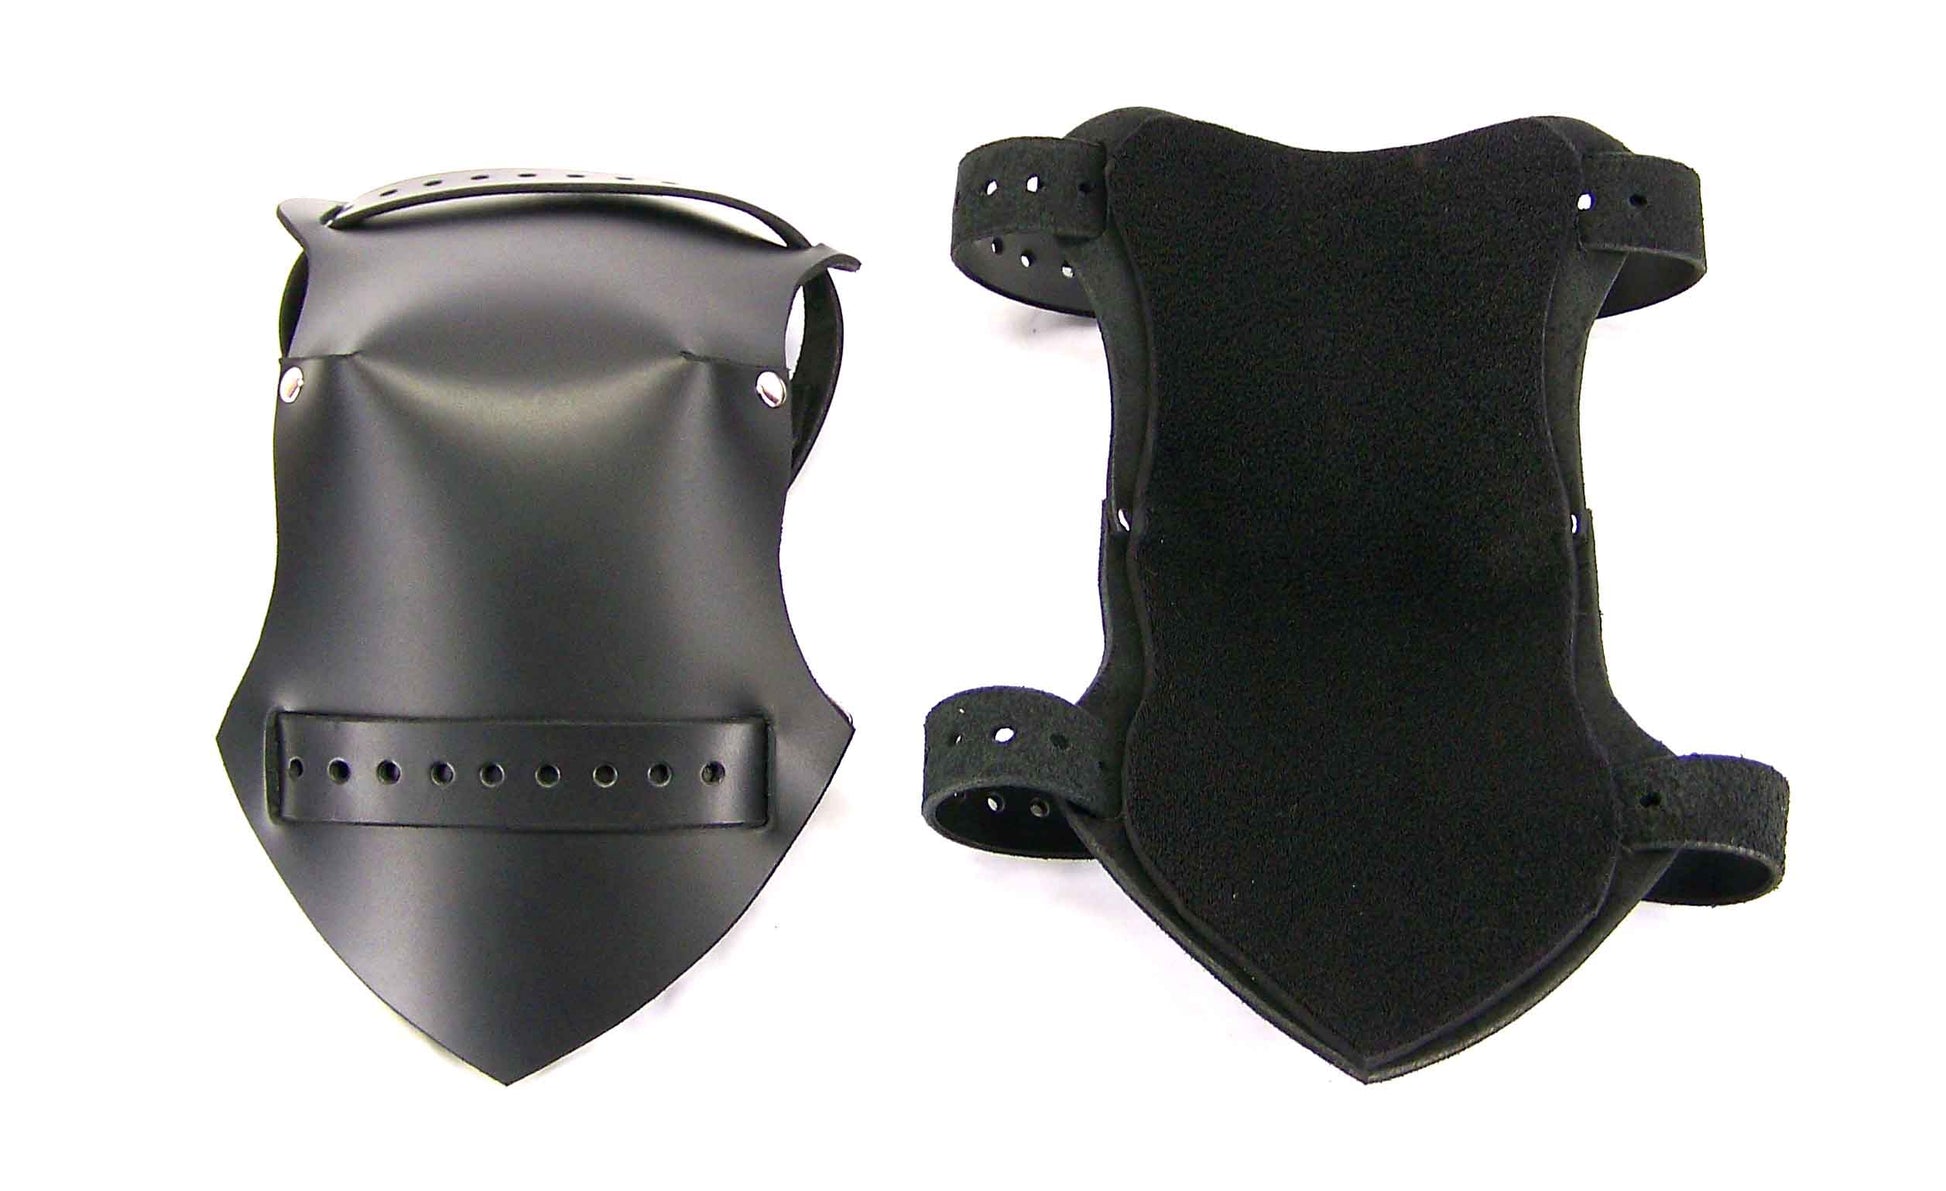 The Leather Knee Pads displayed with one showing the inside of the pad.